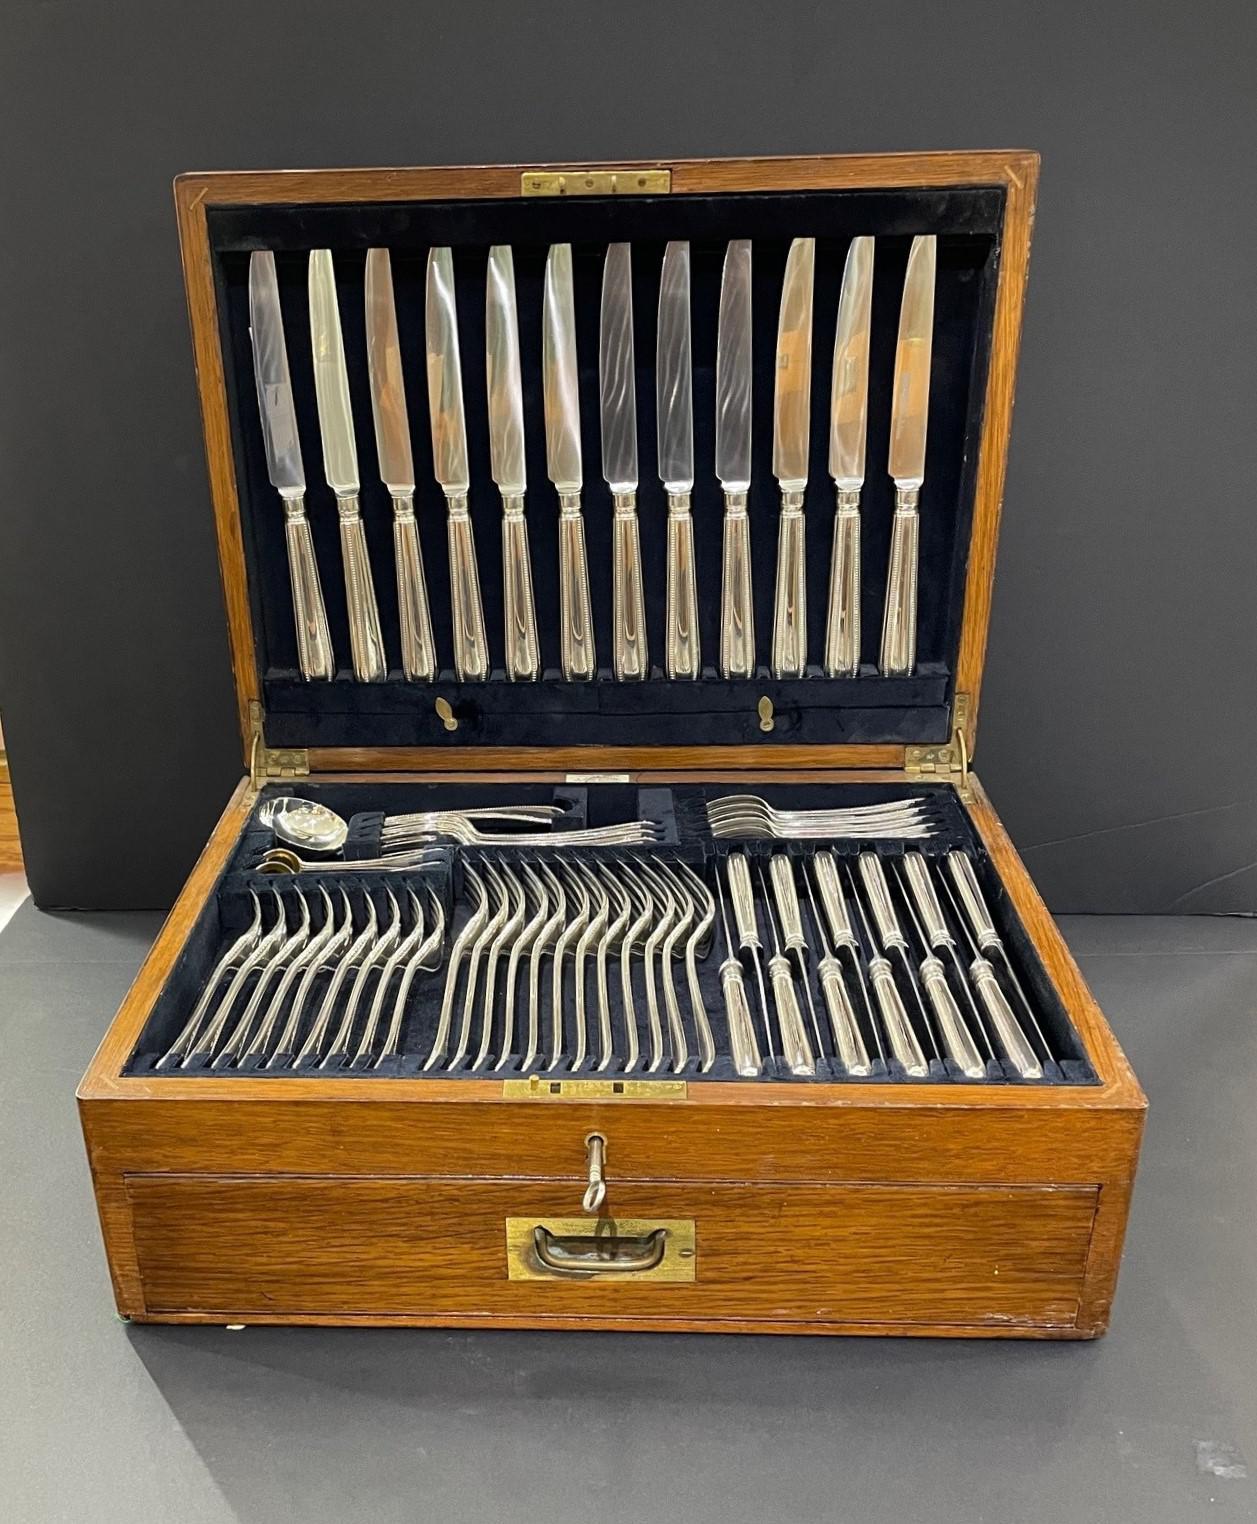 Fine, hand-forged Victorian silver cutlery set in the Bead pattern with all pieces made by one of the 19th century's finest silver cutlery makers, George Adams, in 1870. Fitted in a wooden canteen box, this silver cutlery set is in wonderful